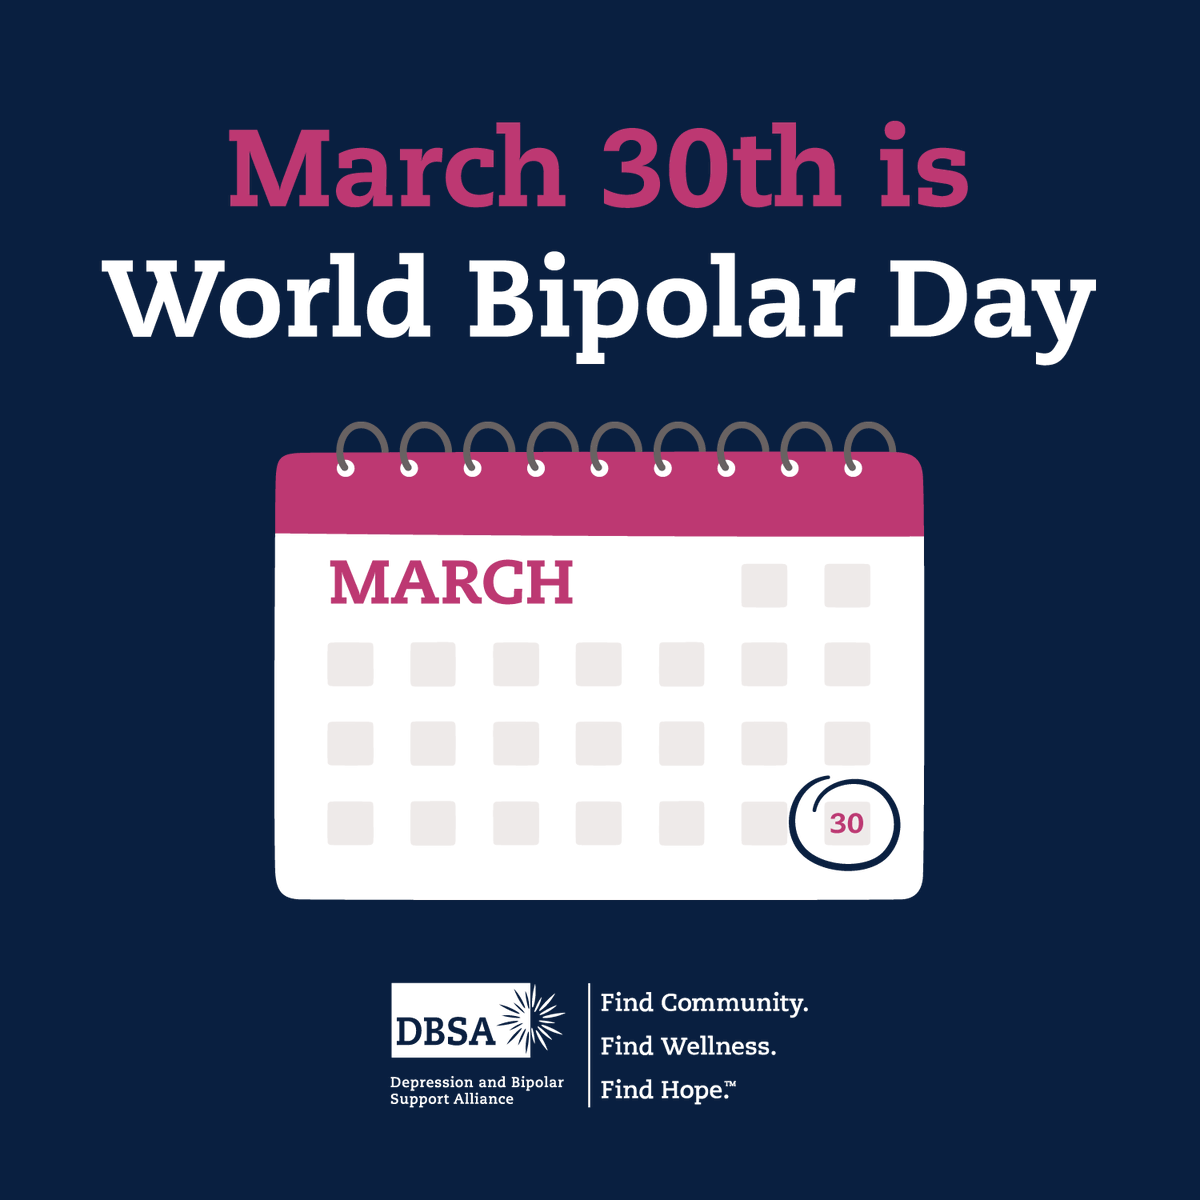 LAST DAY TO DOUBLE YOUR GIFT! We hope you've seen the bipolar disorder resources we've shared this month. DBSA is a leading peer organization for individuals with mood disorders. Your gift will help us provide support, education, and hope all year round. bit.ly/3TrLmCh